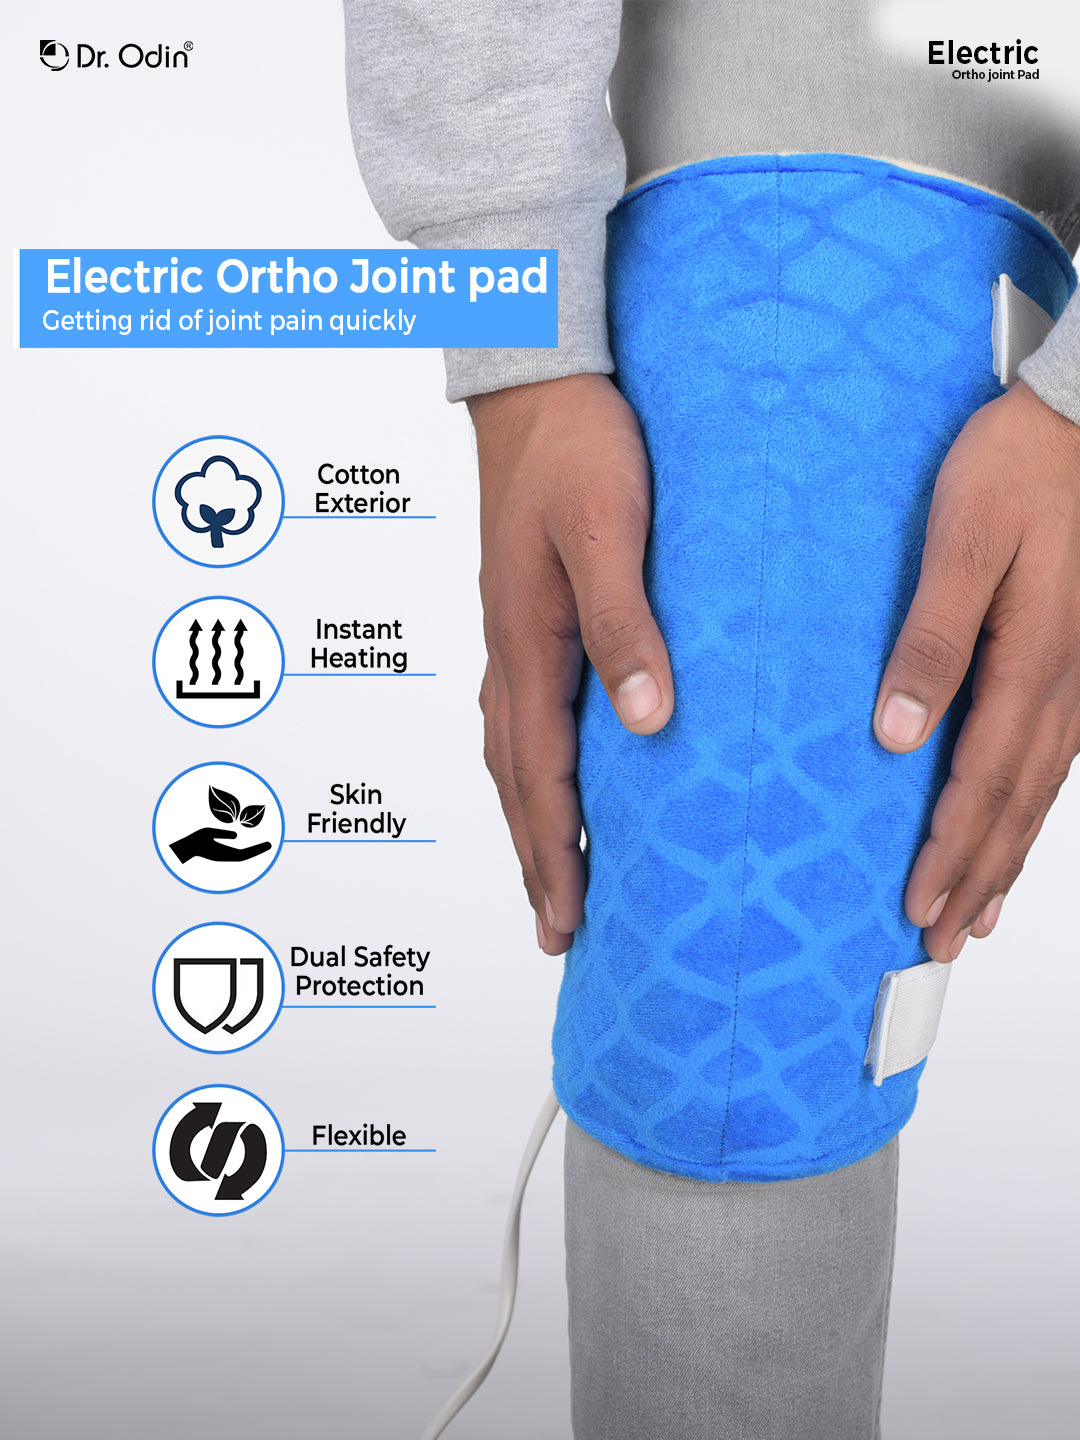 Electric Ortho Joint Pad